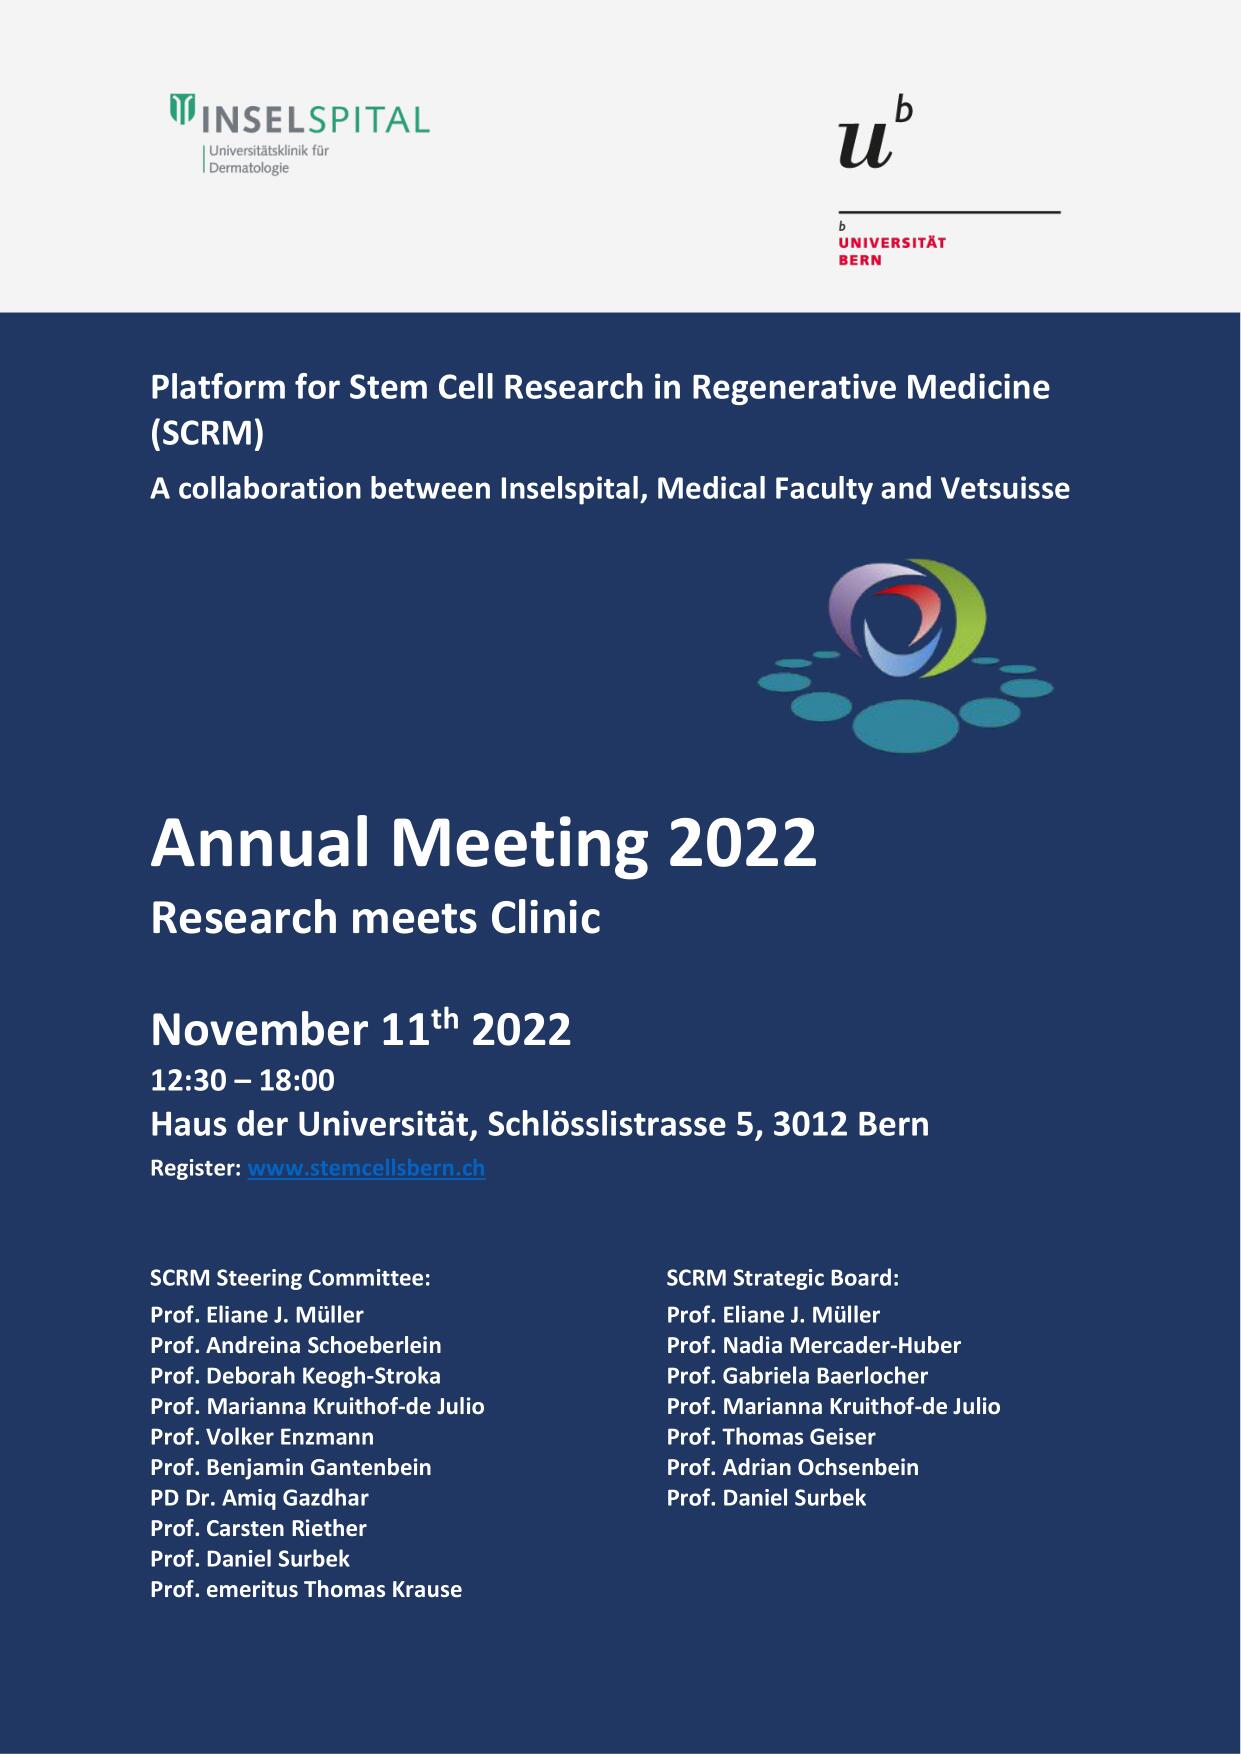 SCRM Annual Meeting 2022 flyer